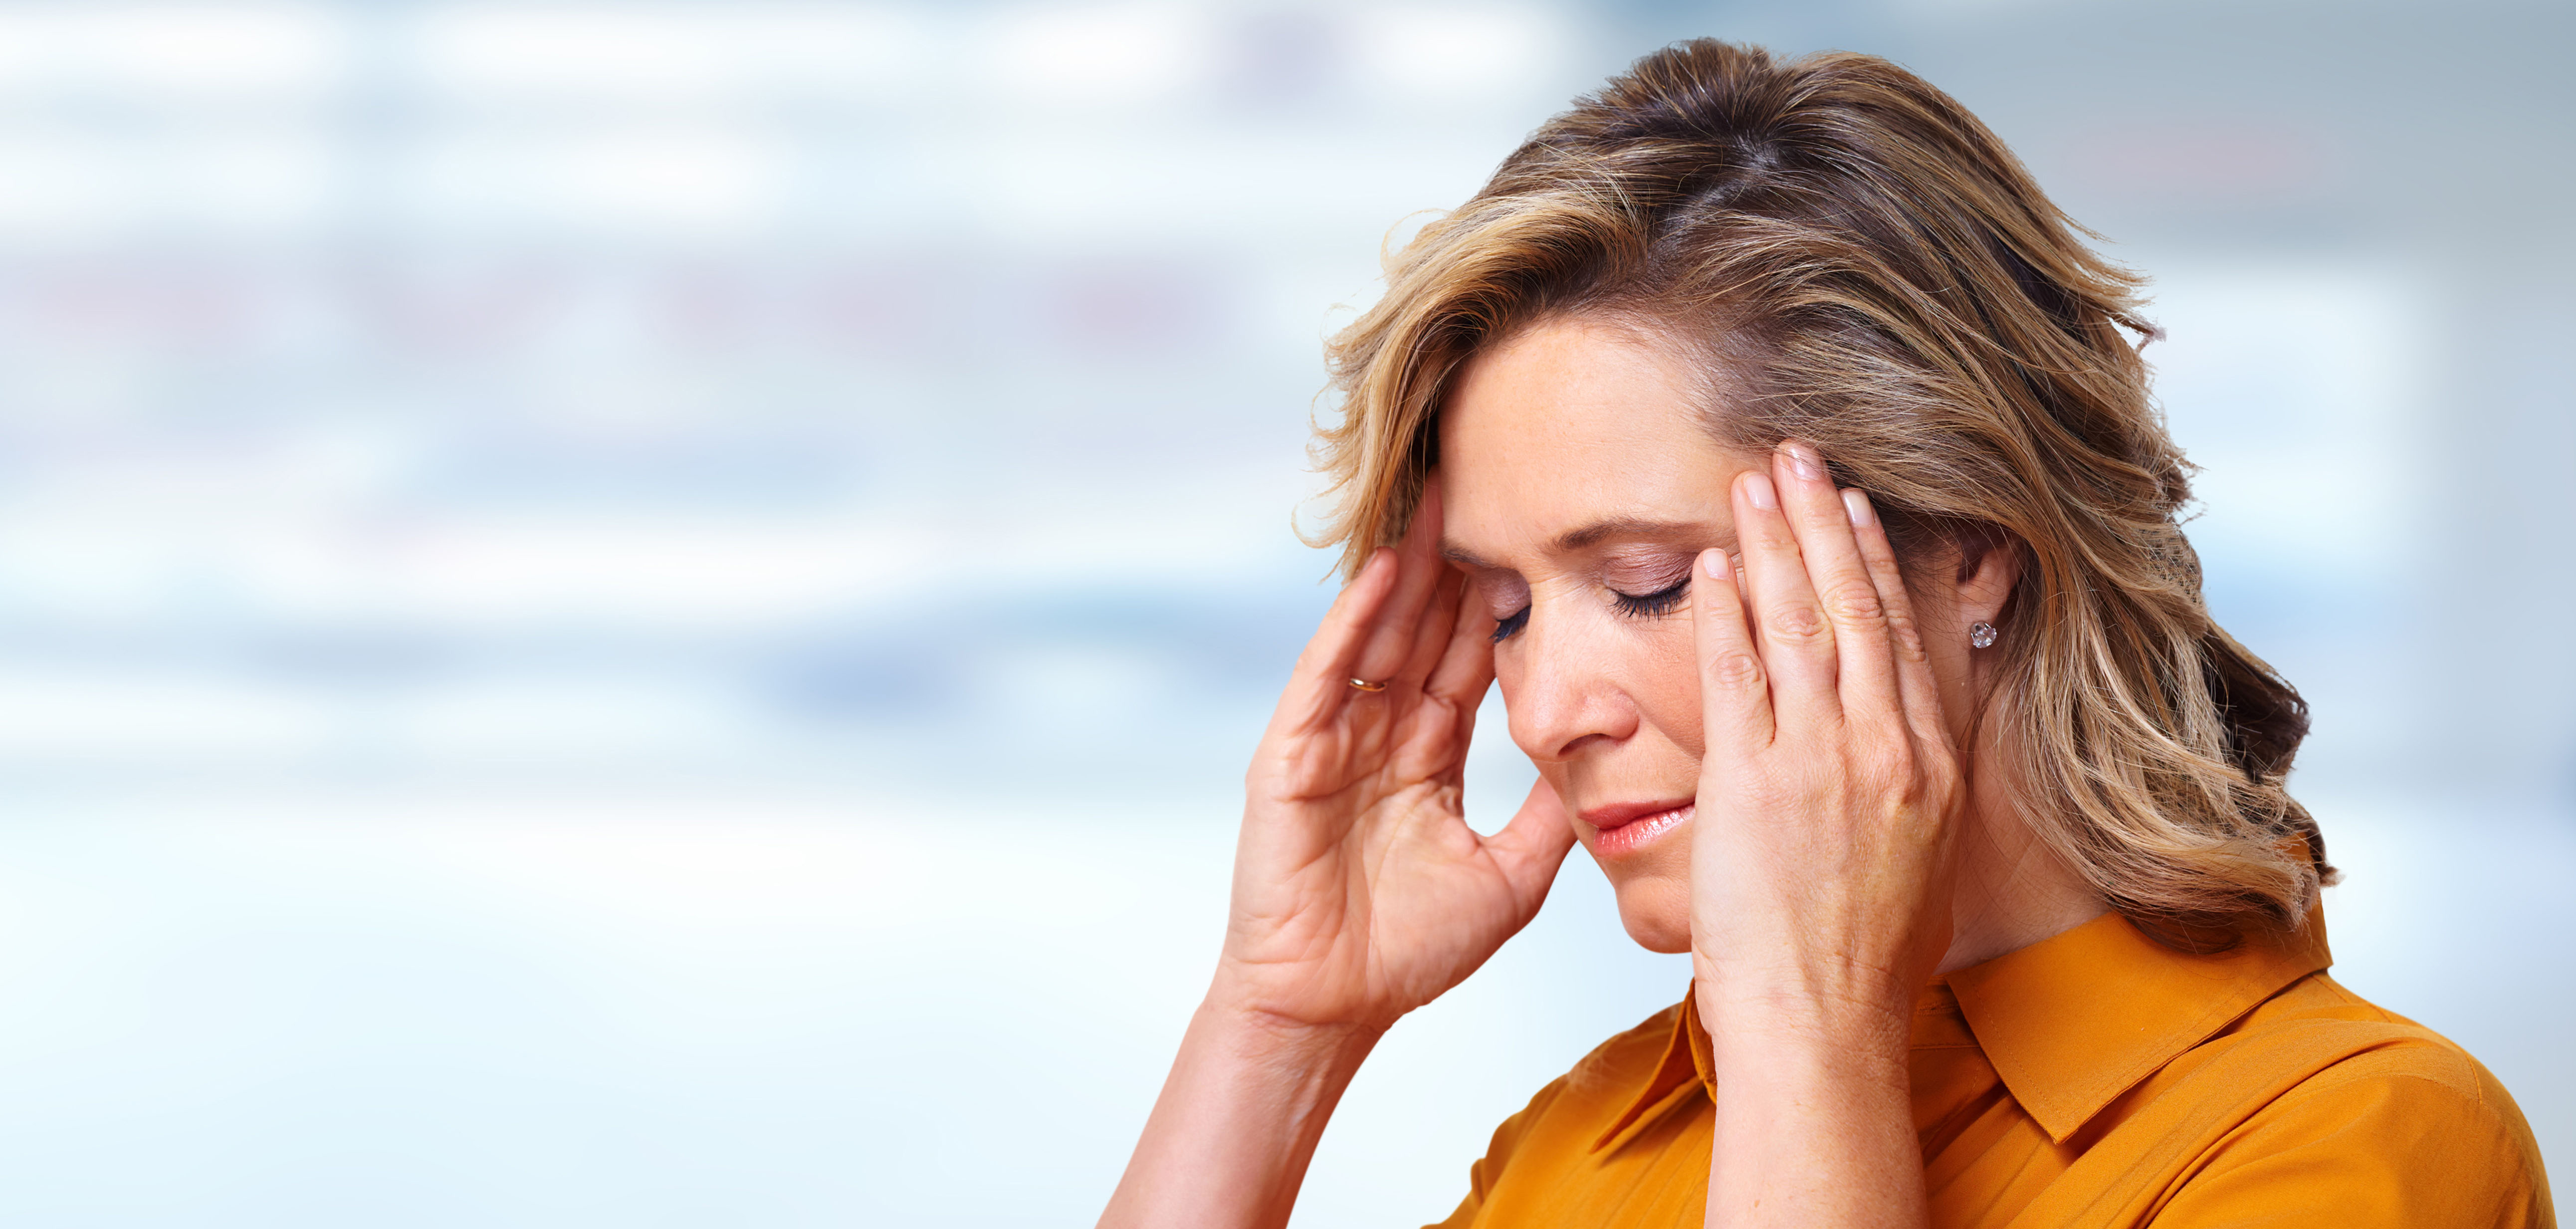 refractory migraine with aura icd 10